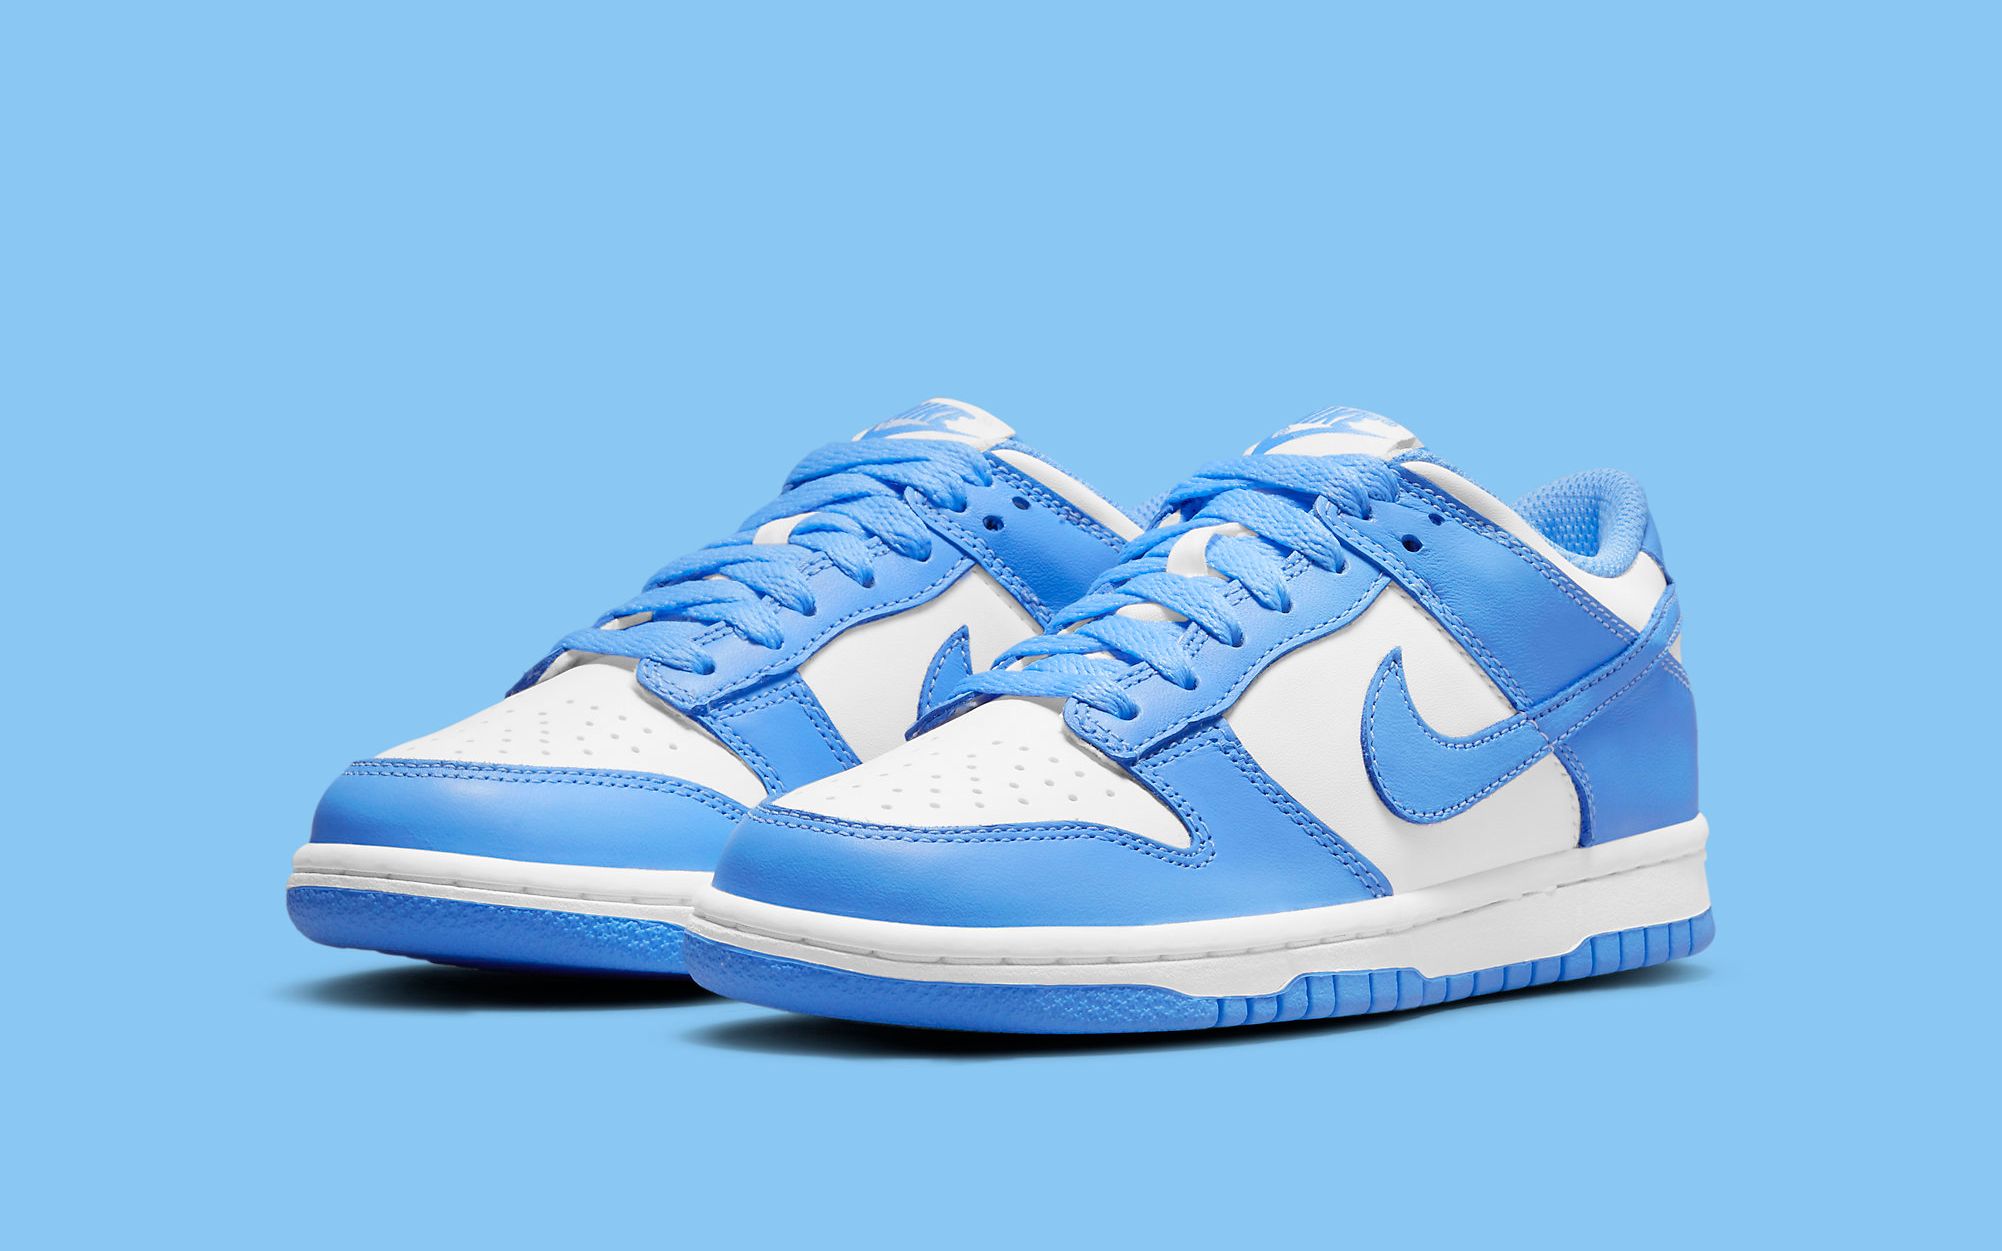 University Blue Dunk Low Returns March 8th in Kid's Sizes | House of Heat°